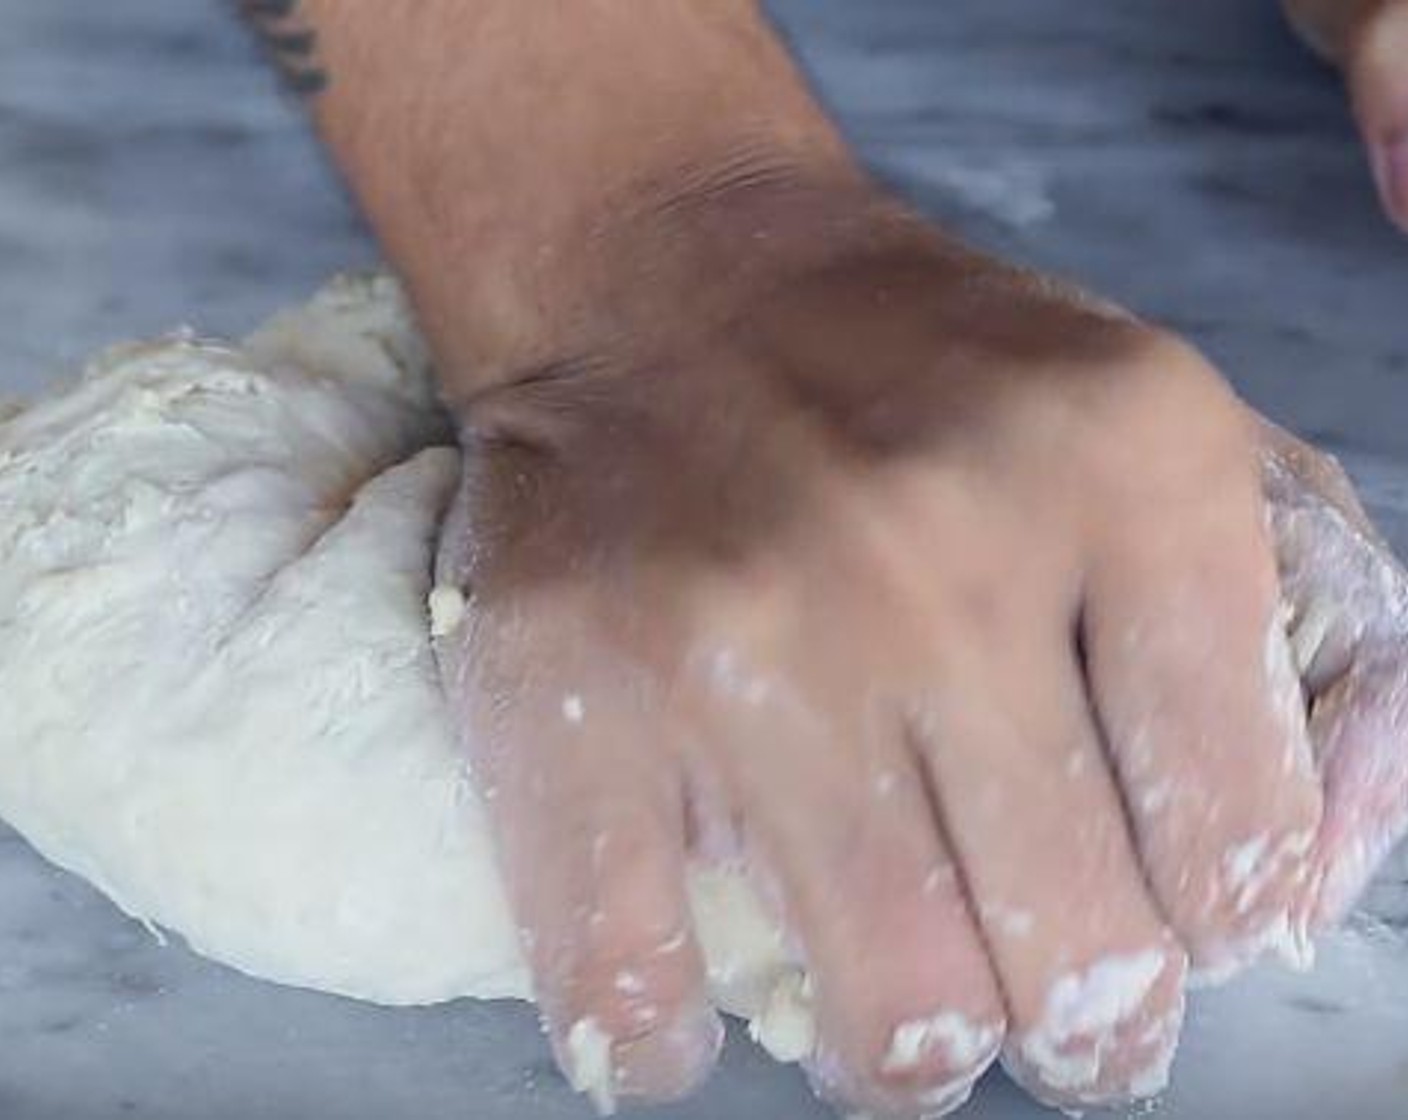 step 2 In a large bowl, add Bread Flour (3 cups) and Salt (1/2 Tbsp) and mix. Add the yeast mixture and Butter (1/4 cup) mix with a wooden spoon until the dough comes together, then switch to your hand. Knead the dough on a surface for 10 minutes.